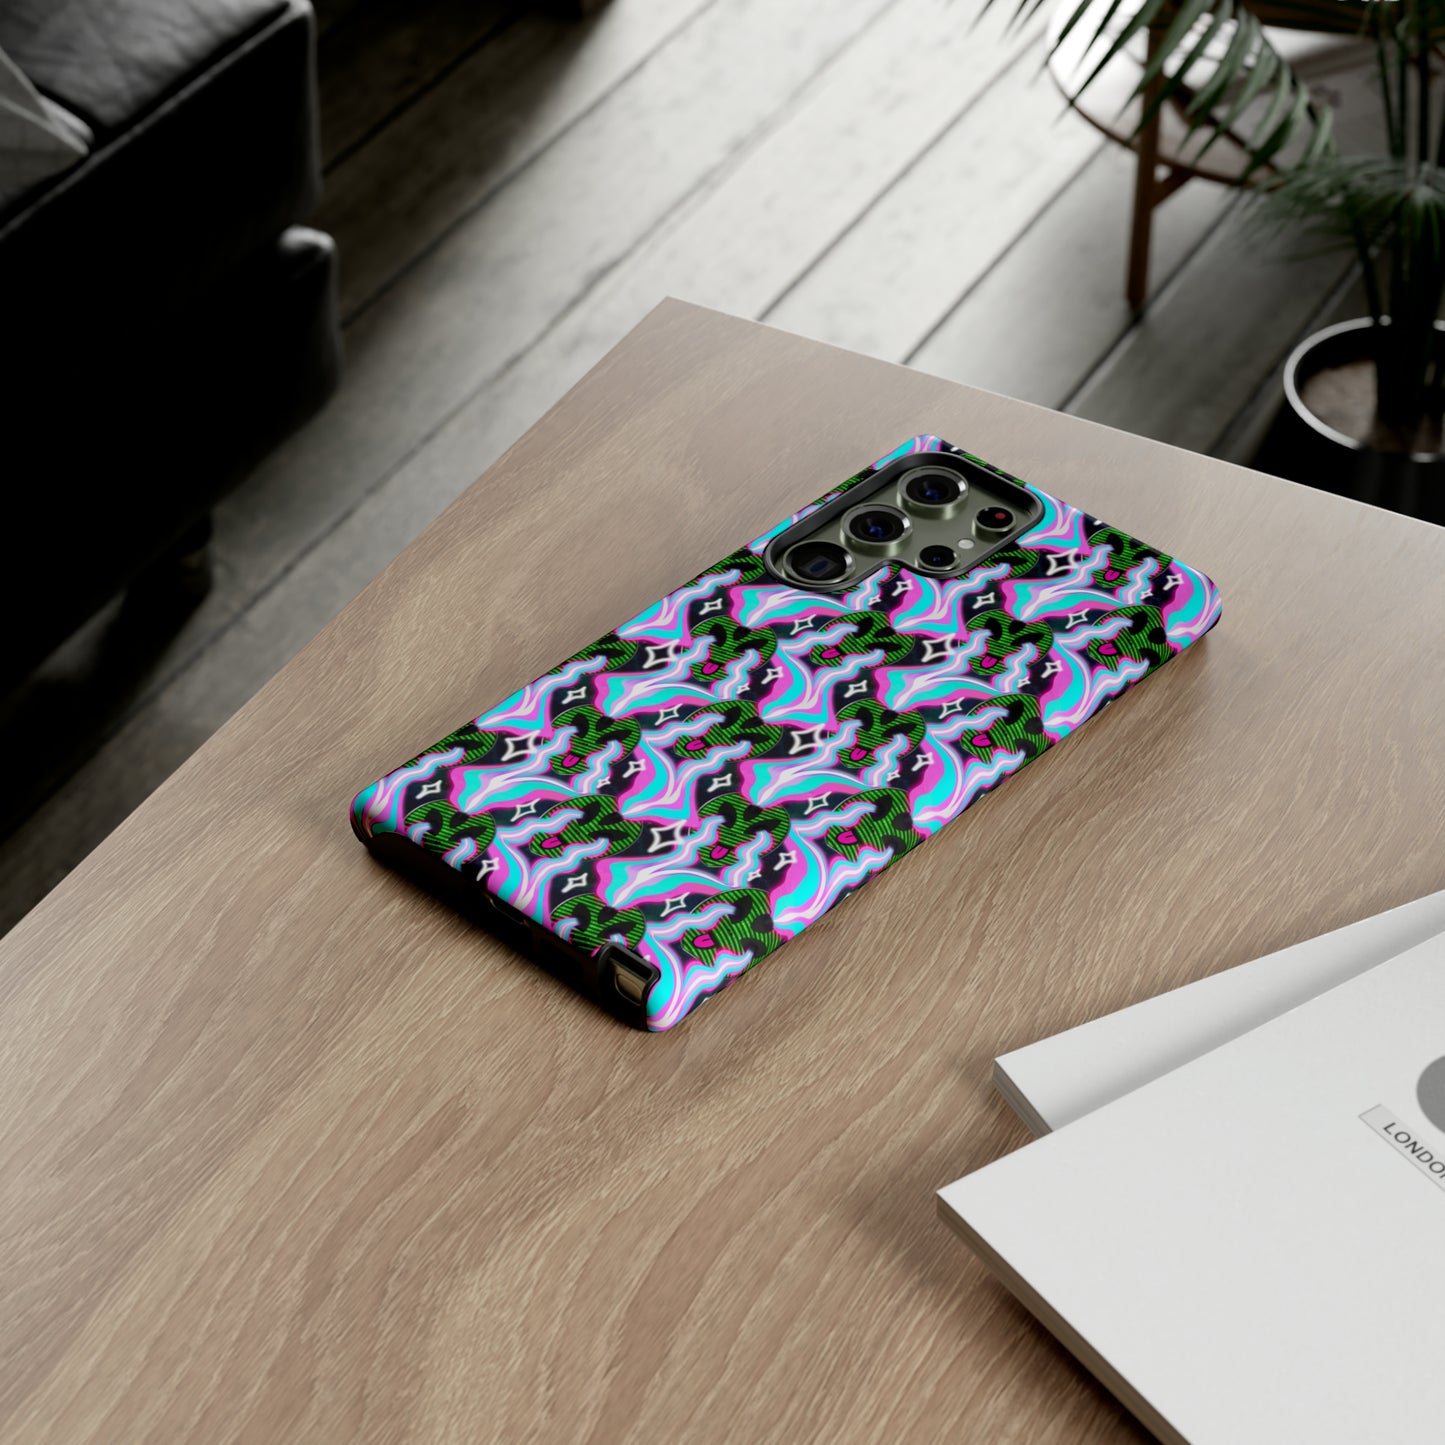 Trippy Alien Tough Phone Case for Iphones, Samsungs, and Google phones